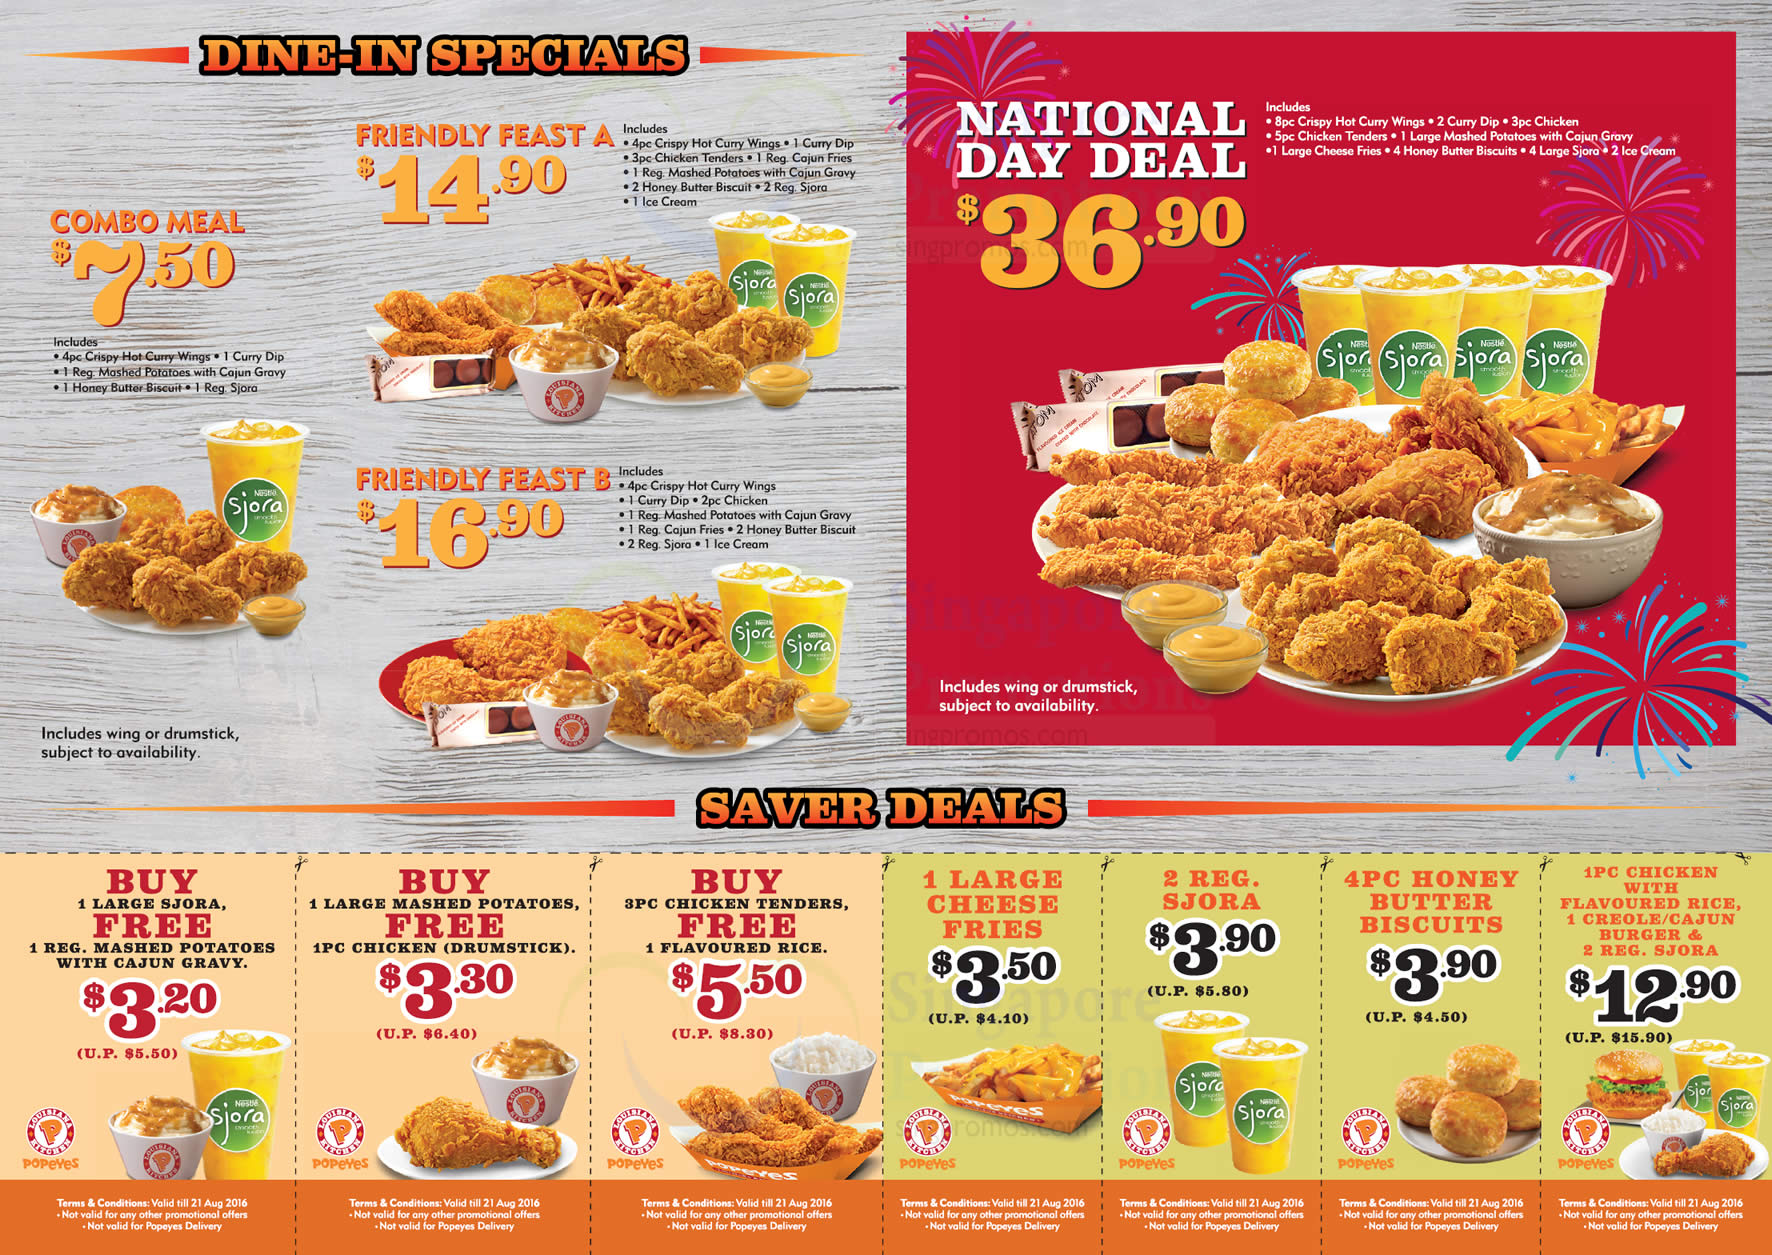 Popeyes: Dine-in Discount Coupon Deals from 11 Jul – 21 Aug 2016